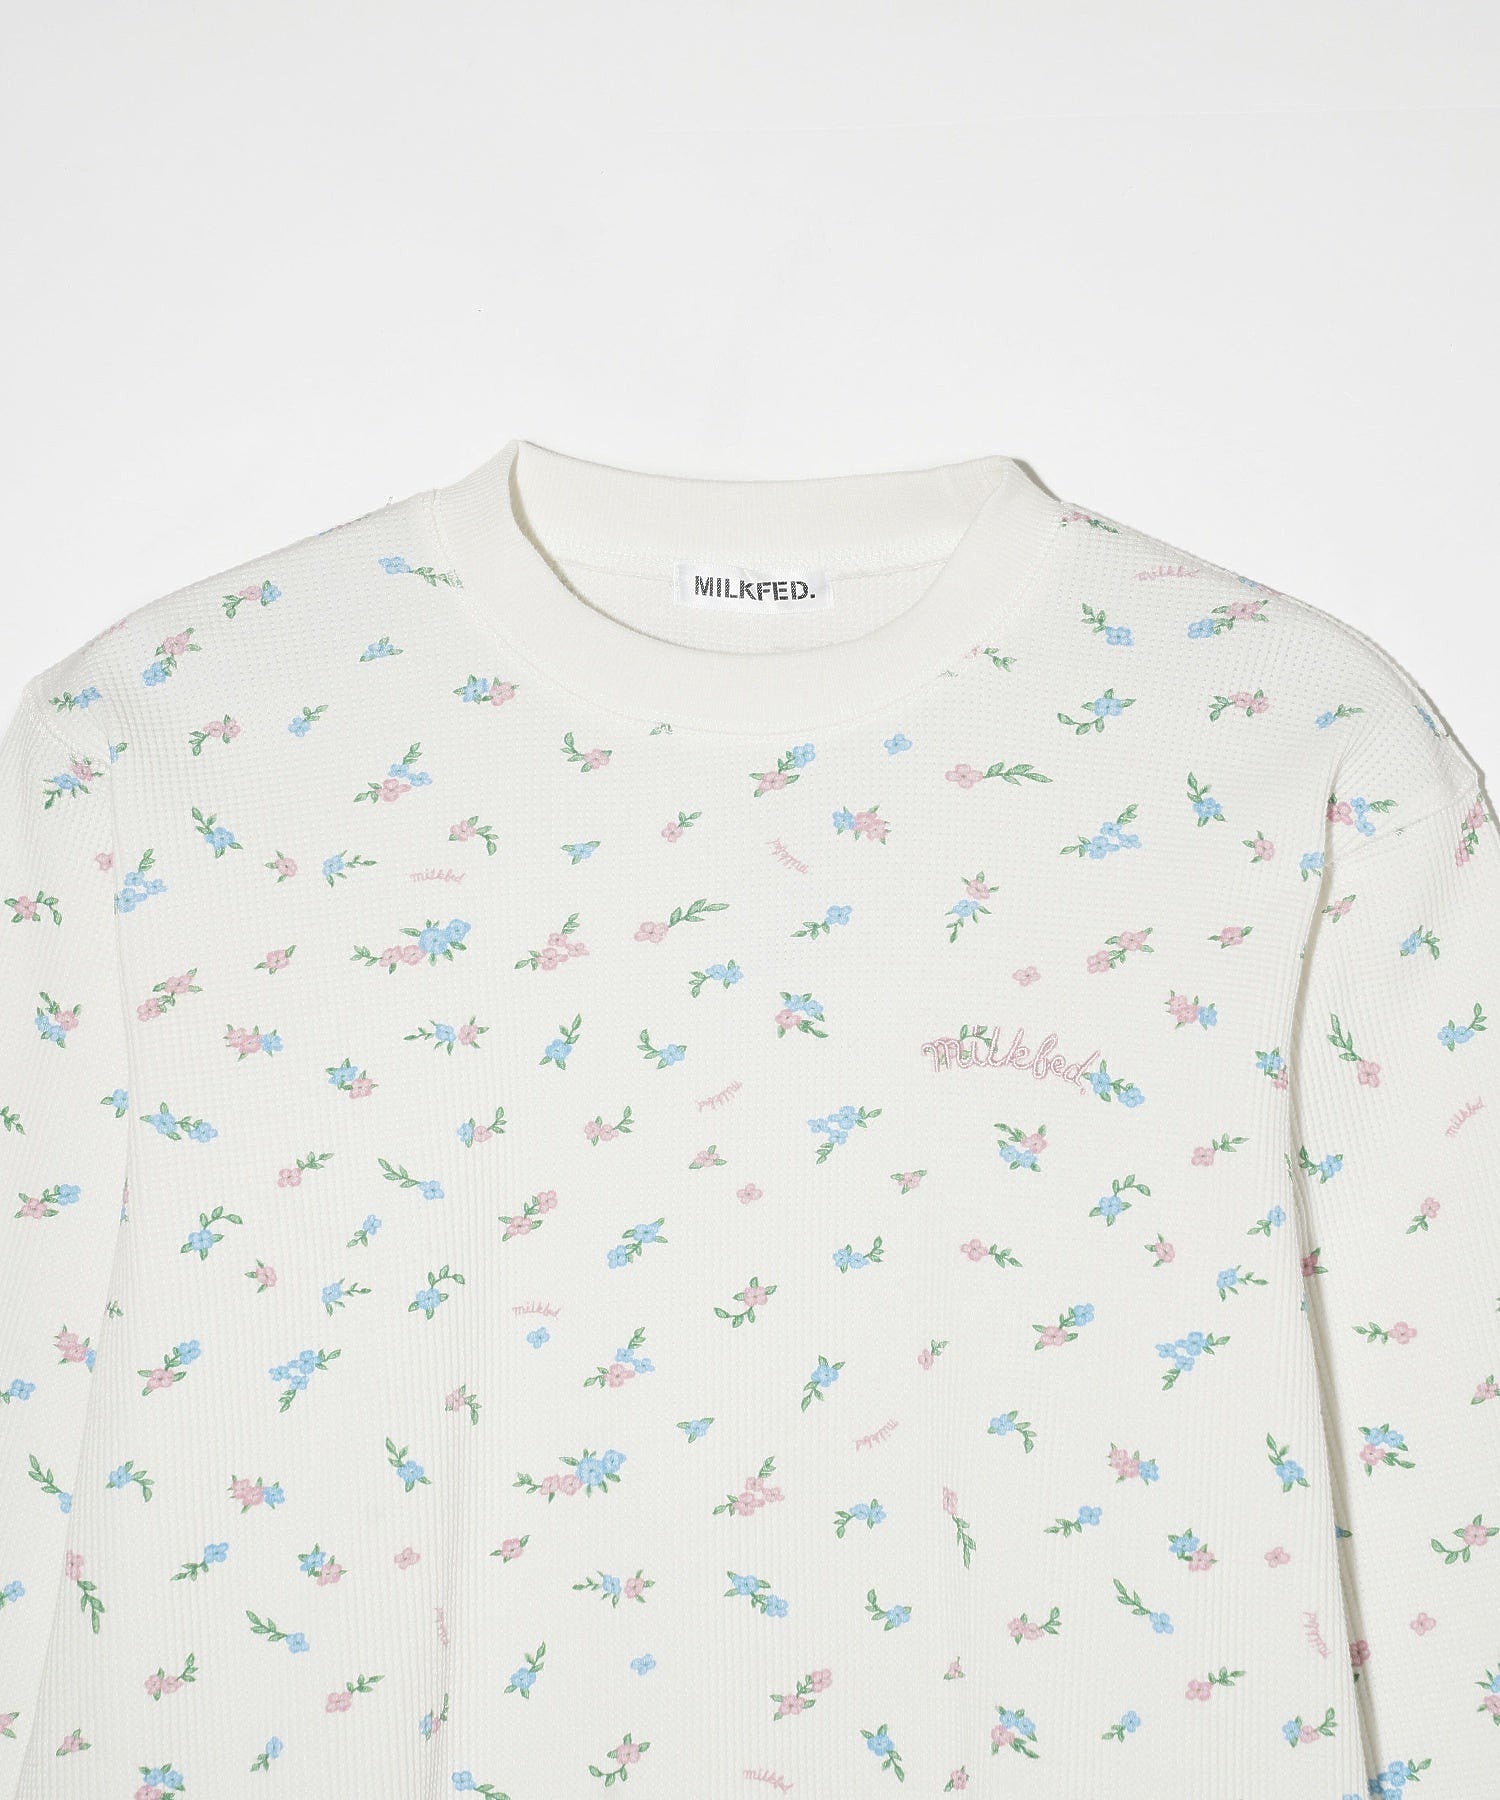 FLORAL PATTERN WAFFLE L/S TOP MILKFED.